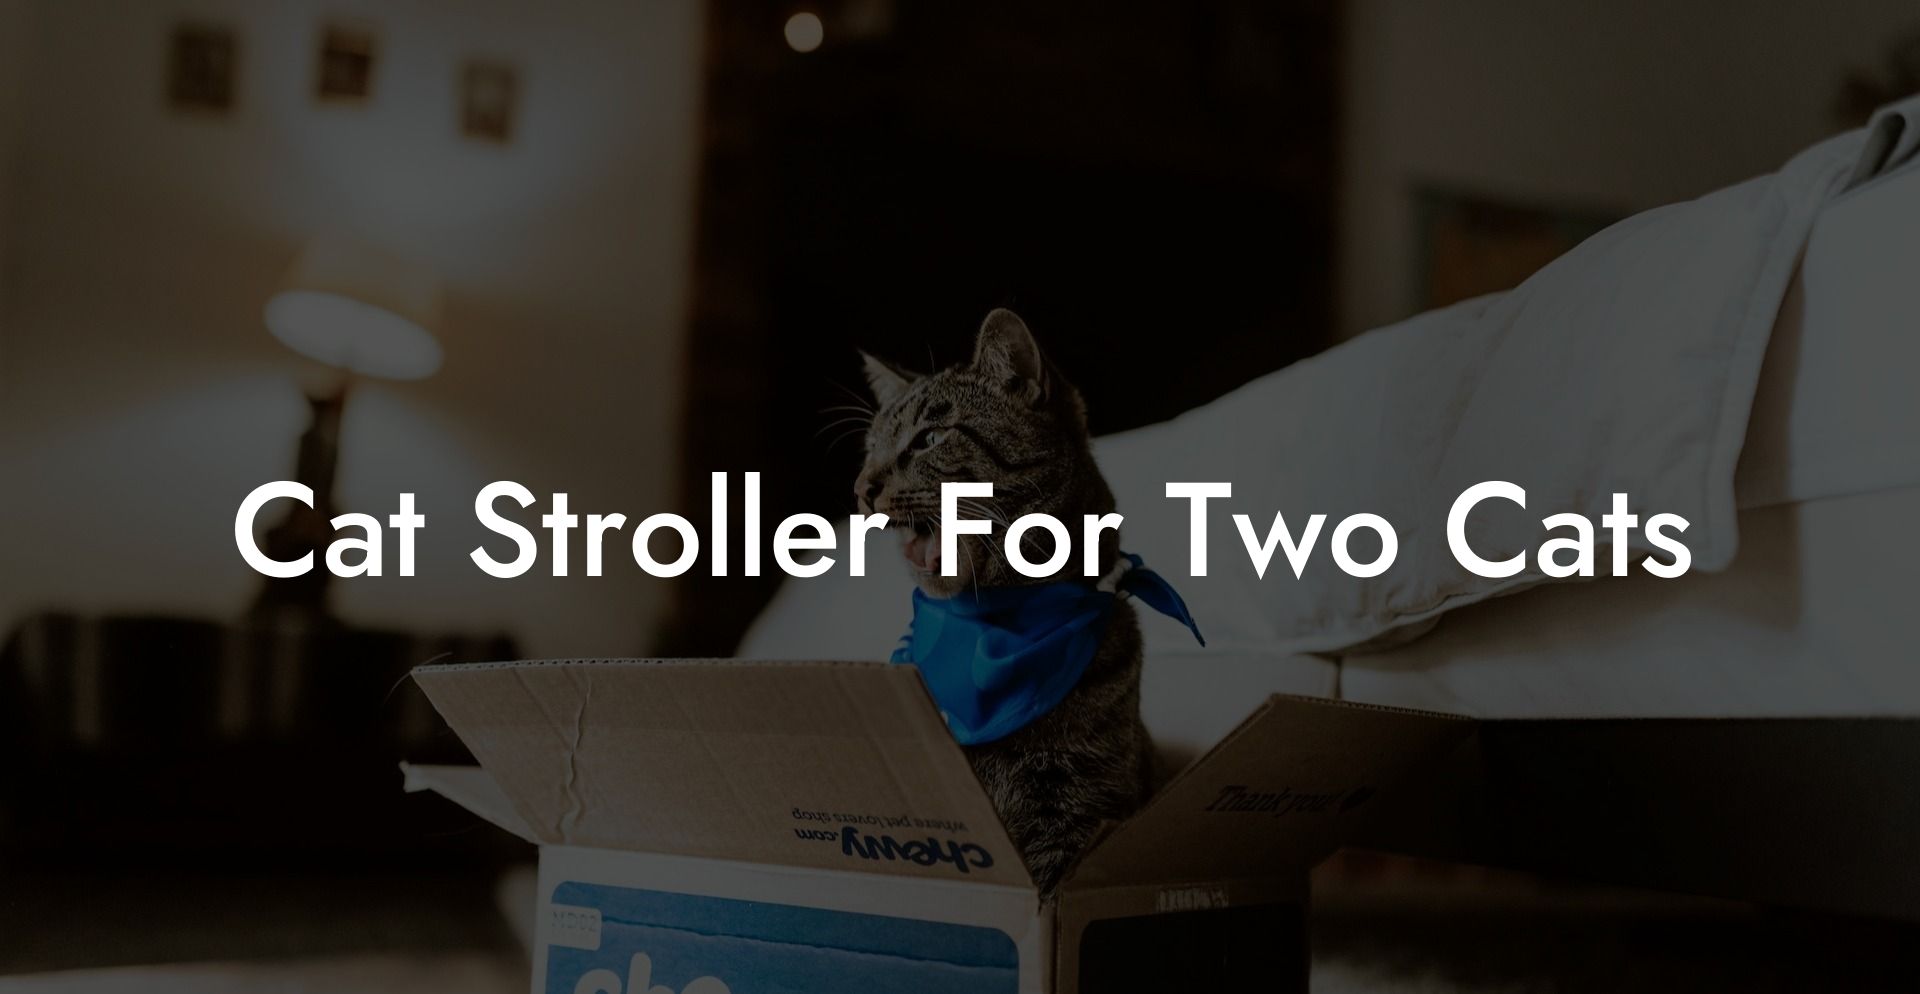 Cat Stroller For Two Cats